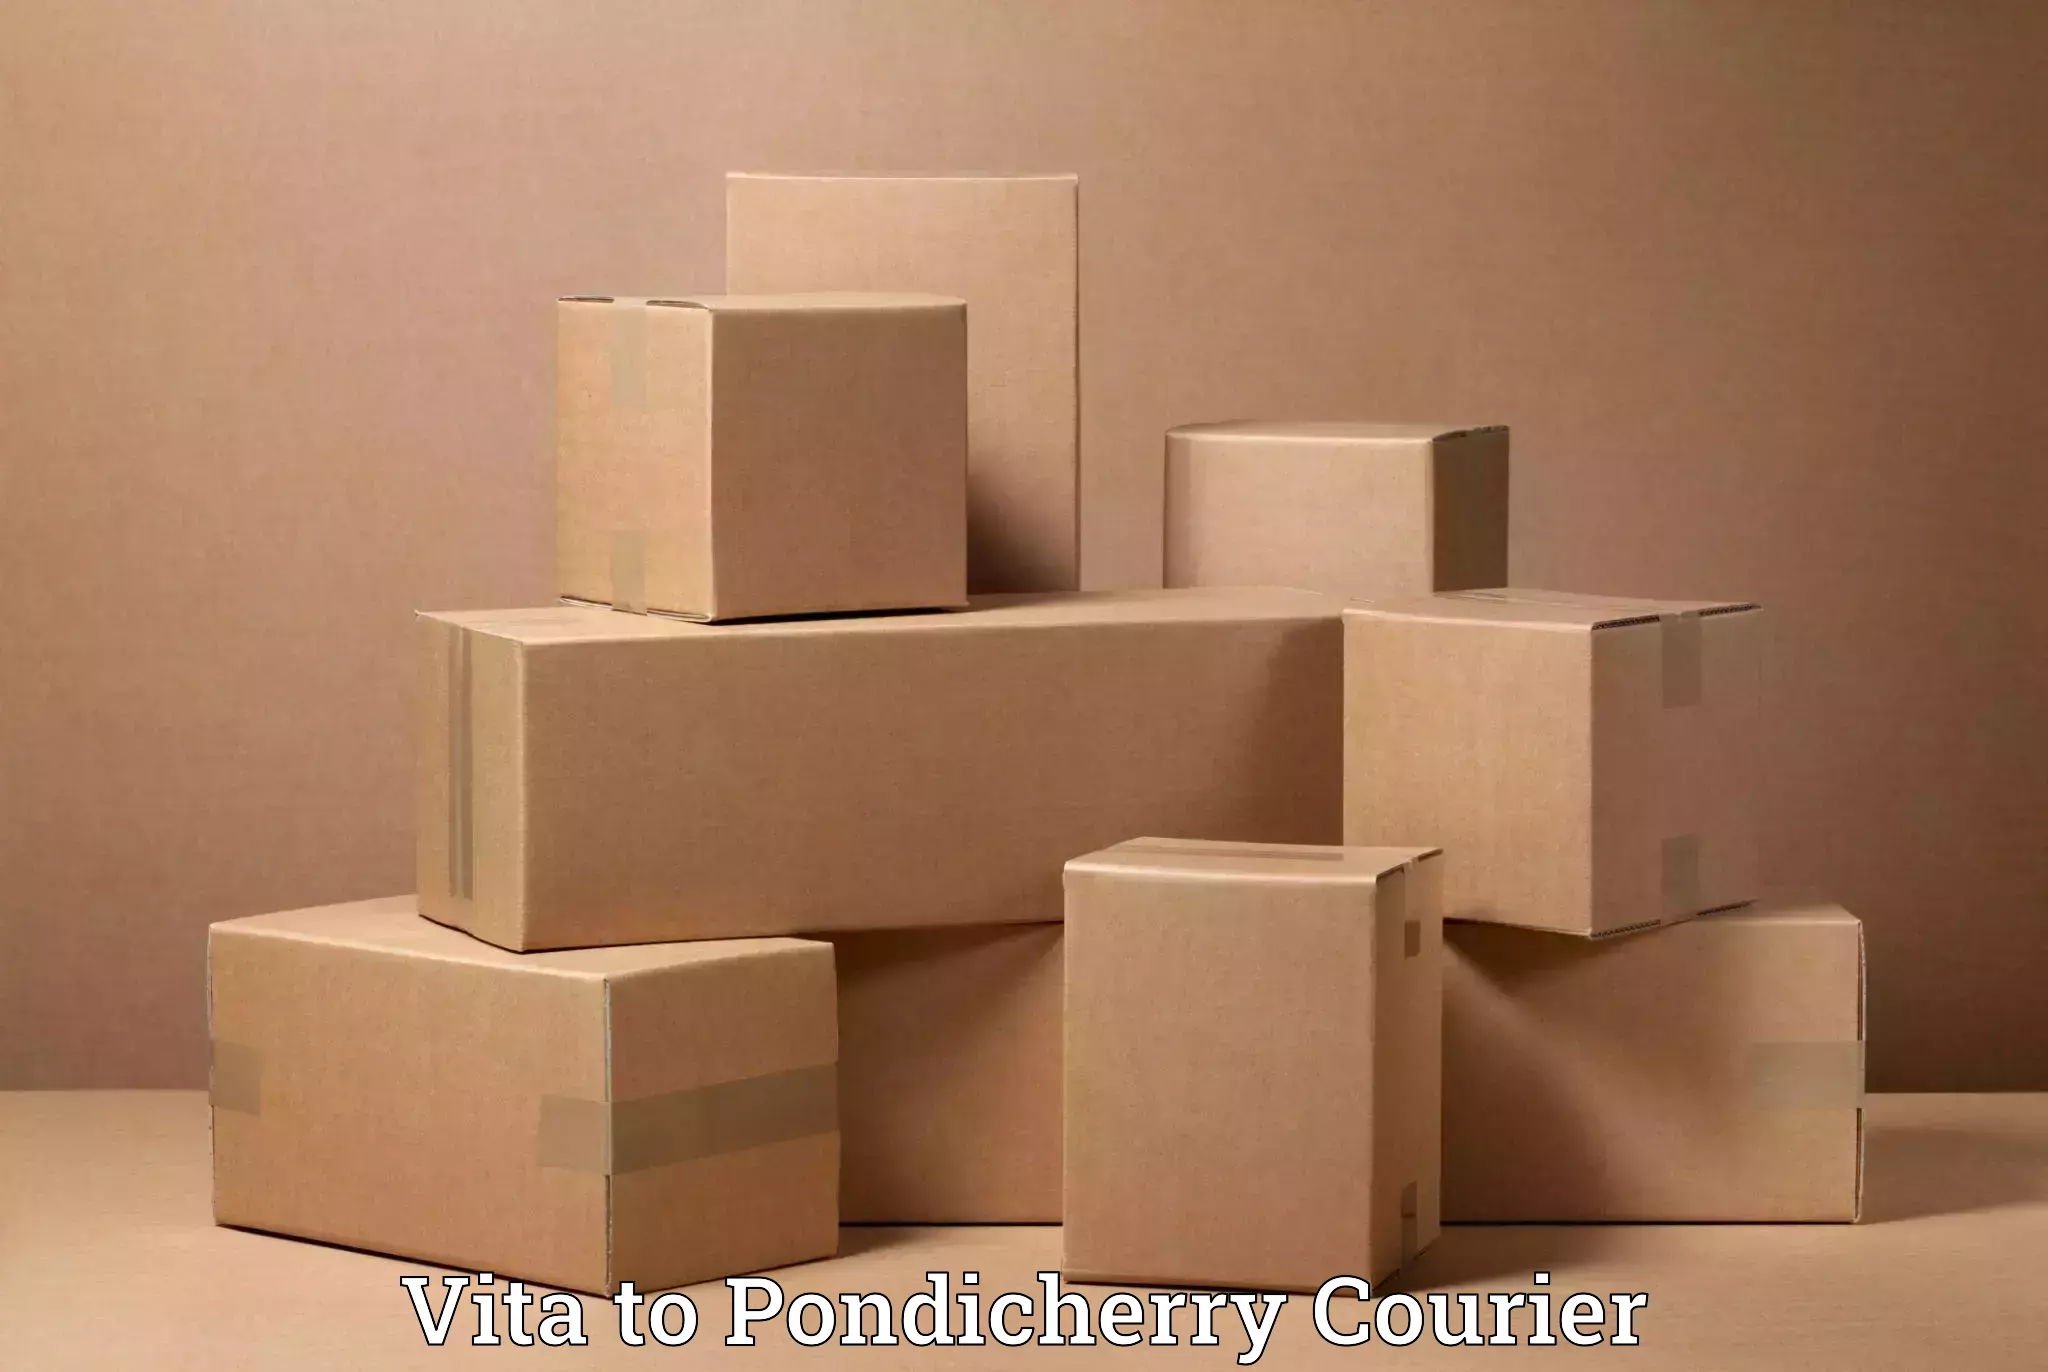 Moving and packing experts Vita to Pondicherry